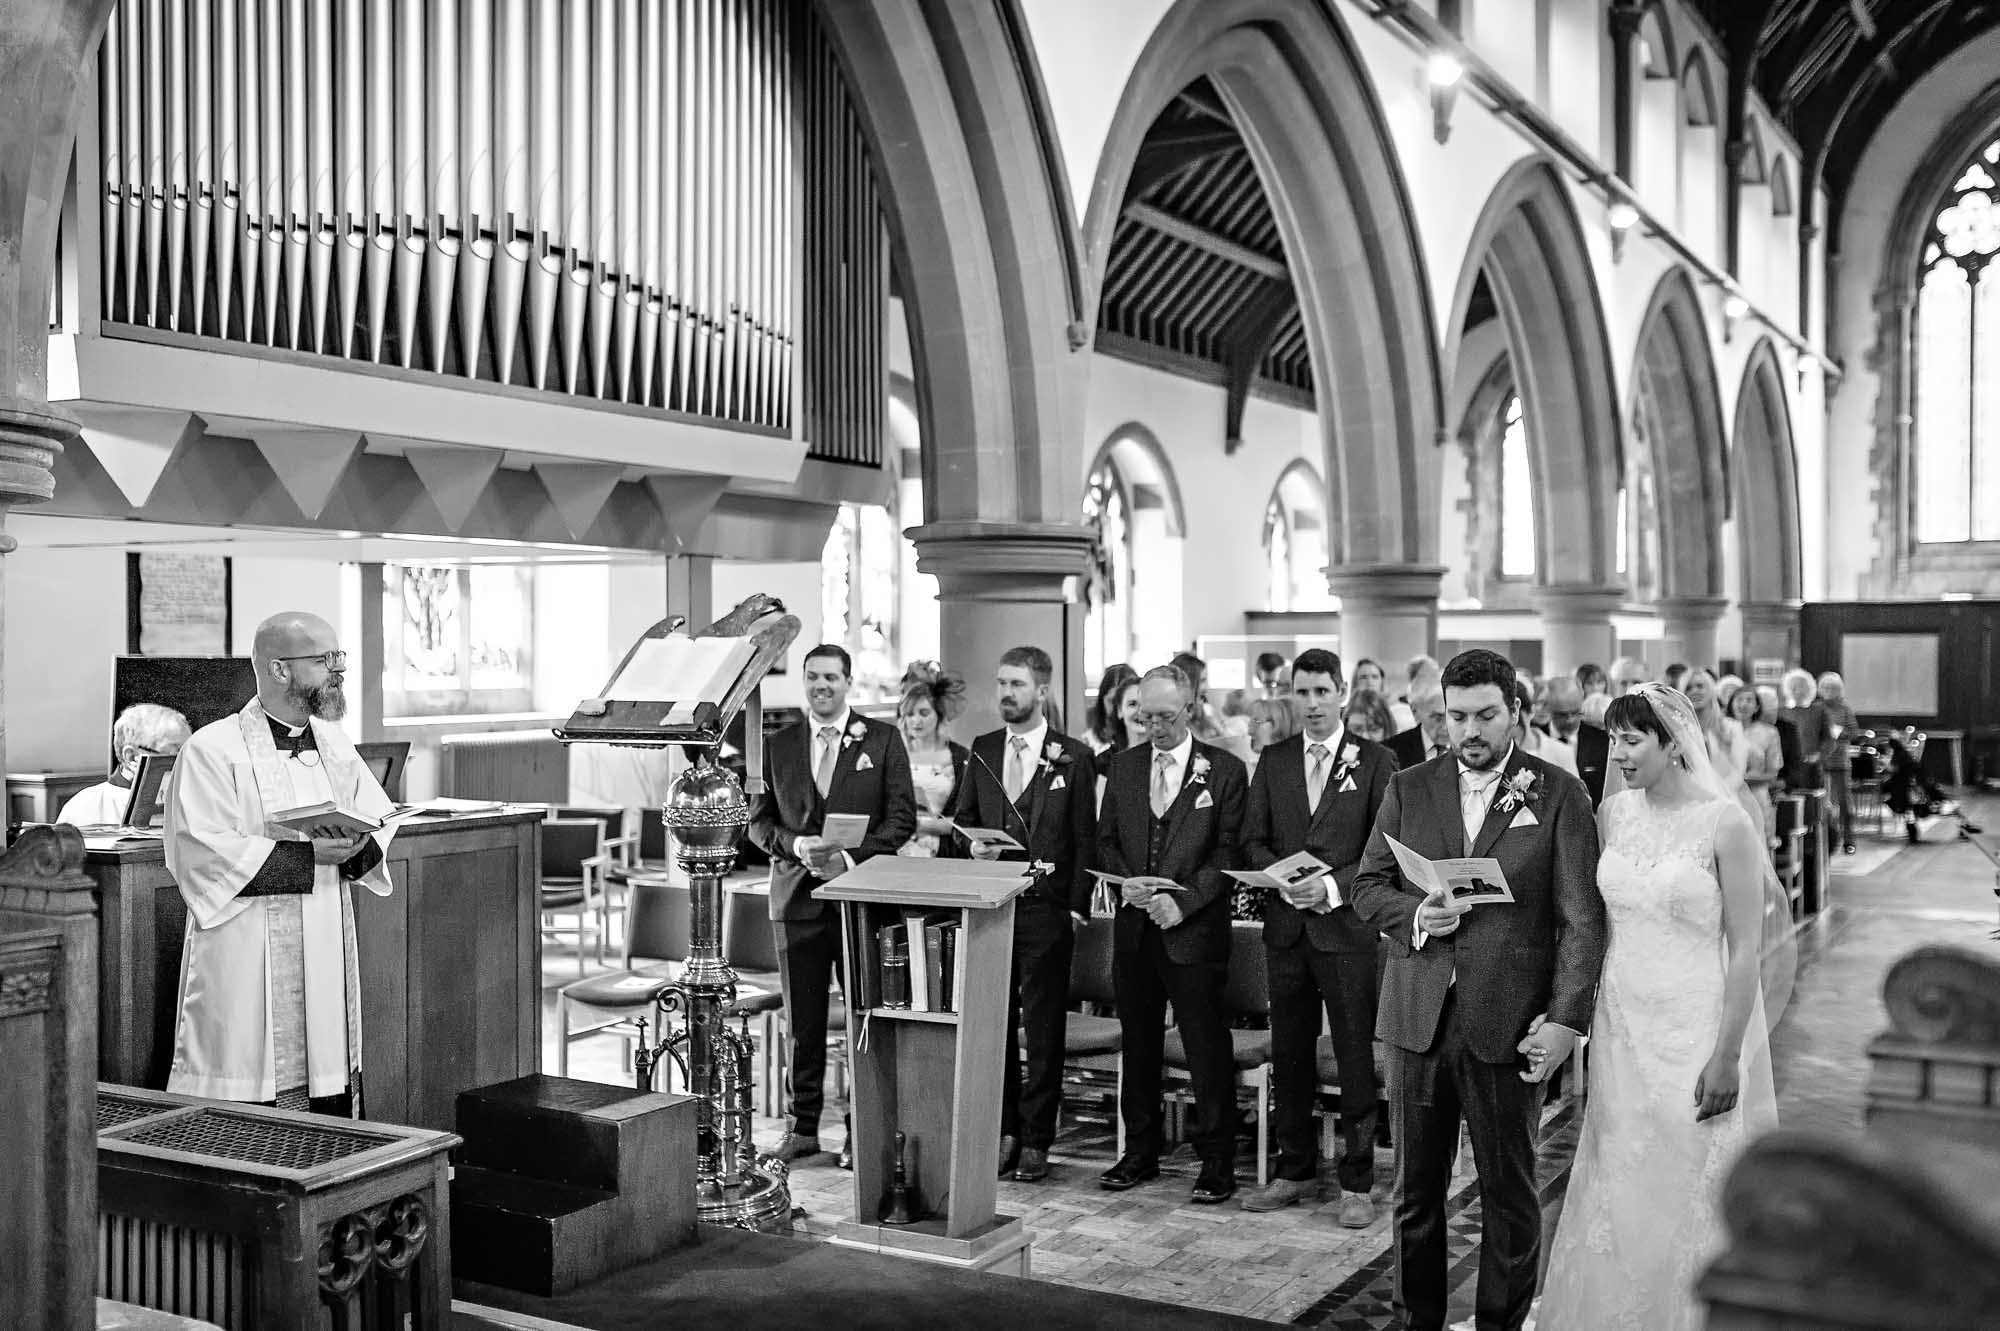 Overview of church wedding in Caerphilly - couple and congregation singing